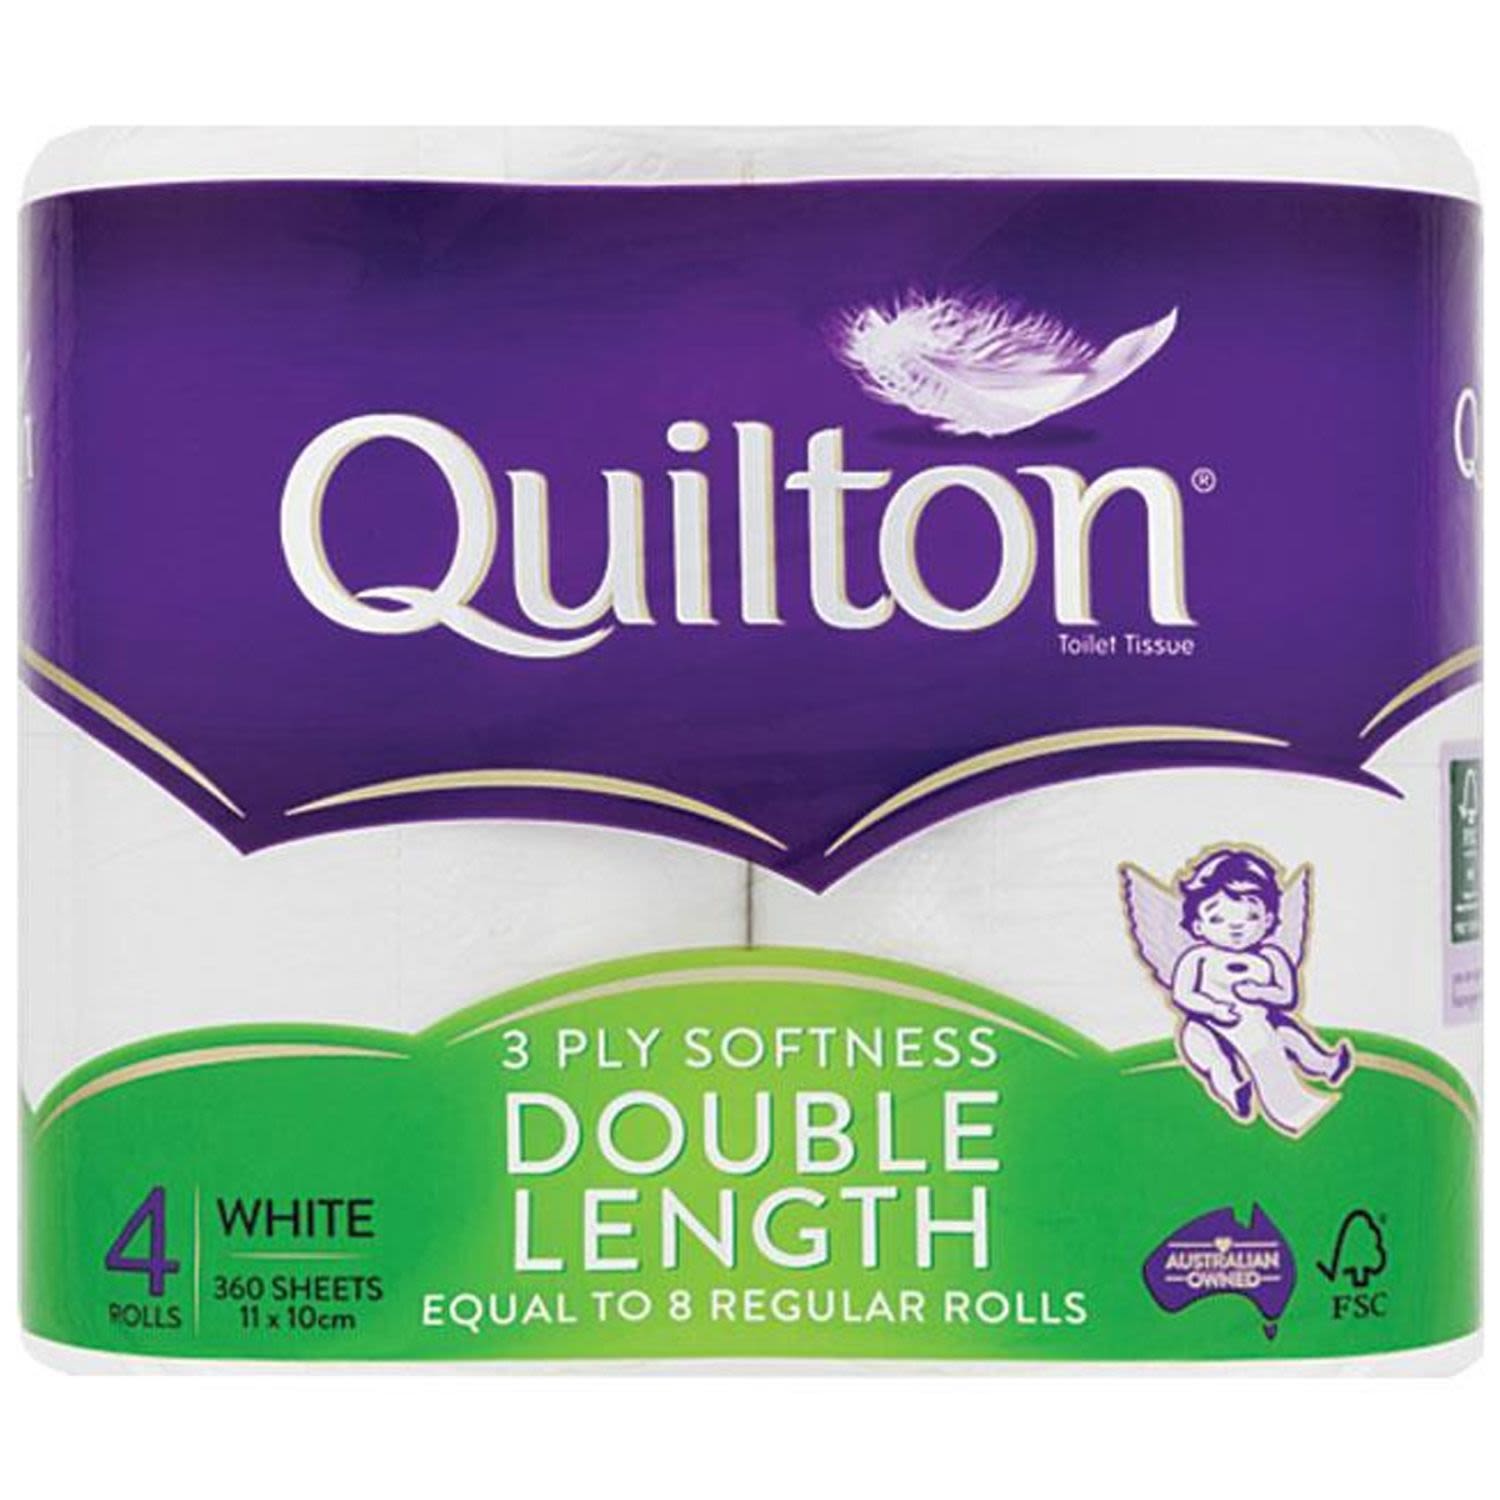 Quilton Toilet Roll White 3ply Double Length, 4 Each